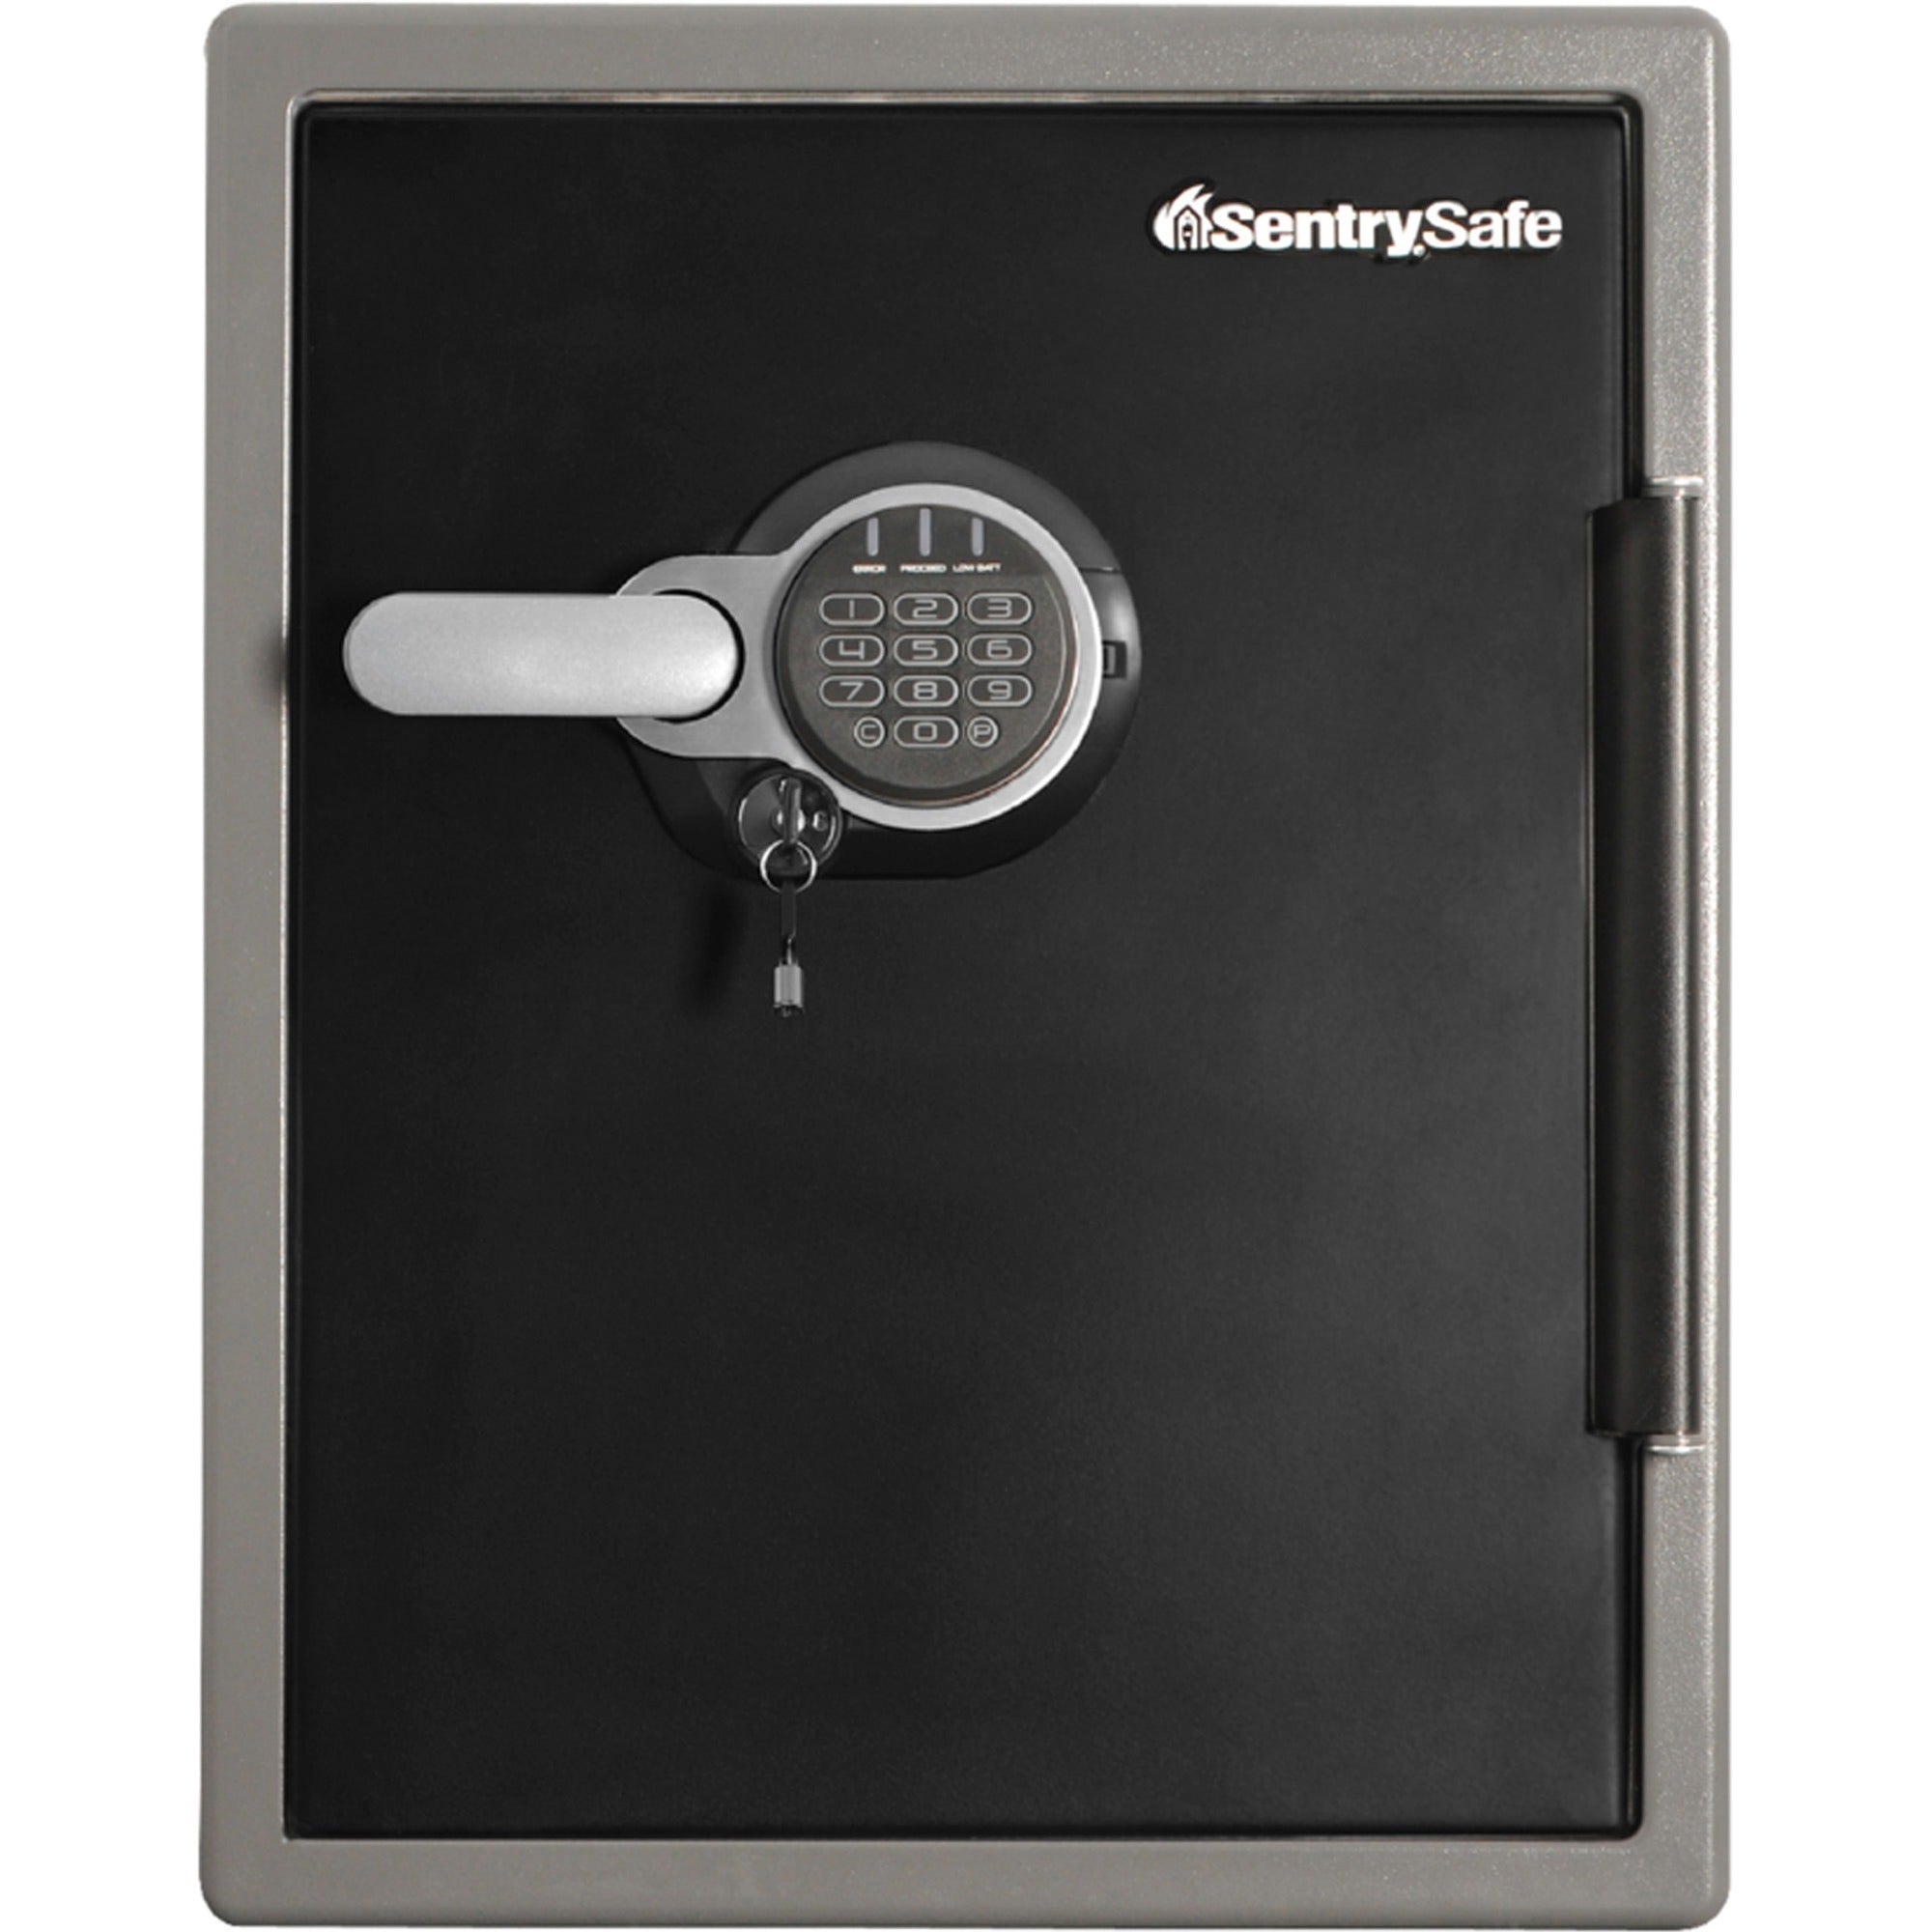 sentry-safe-digital-fire-water-safe-2-ft-digital-programmable-dual-key-lock-4-live-locking-bolts-fire-proof-water-resistant-pry-resistant-for-tablet-cell-phone-external-hard-drive-memory-card-usb-drive-cd-dvd-home-office-in_sensfw205gqc - 2